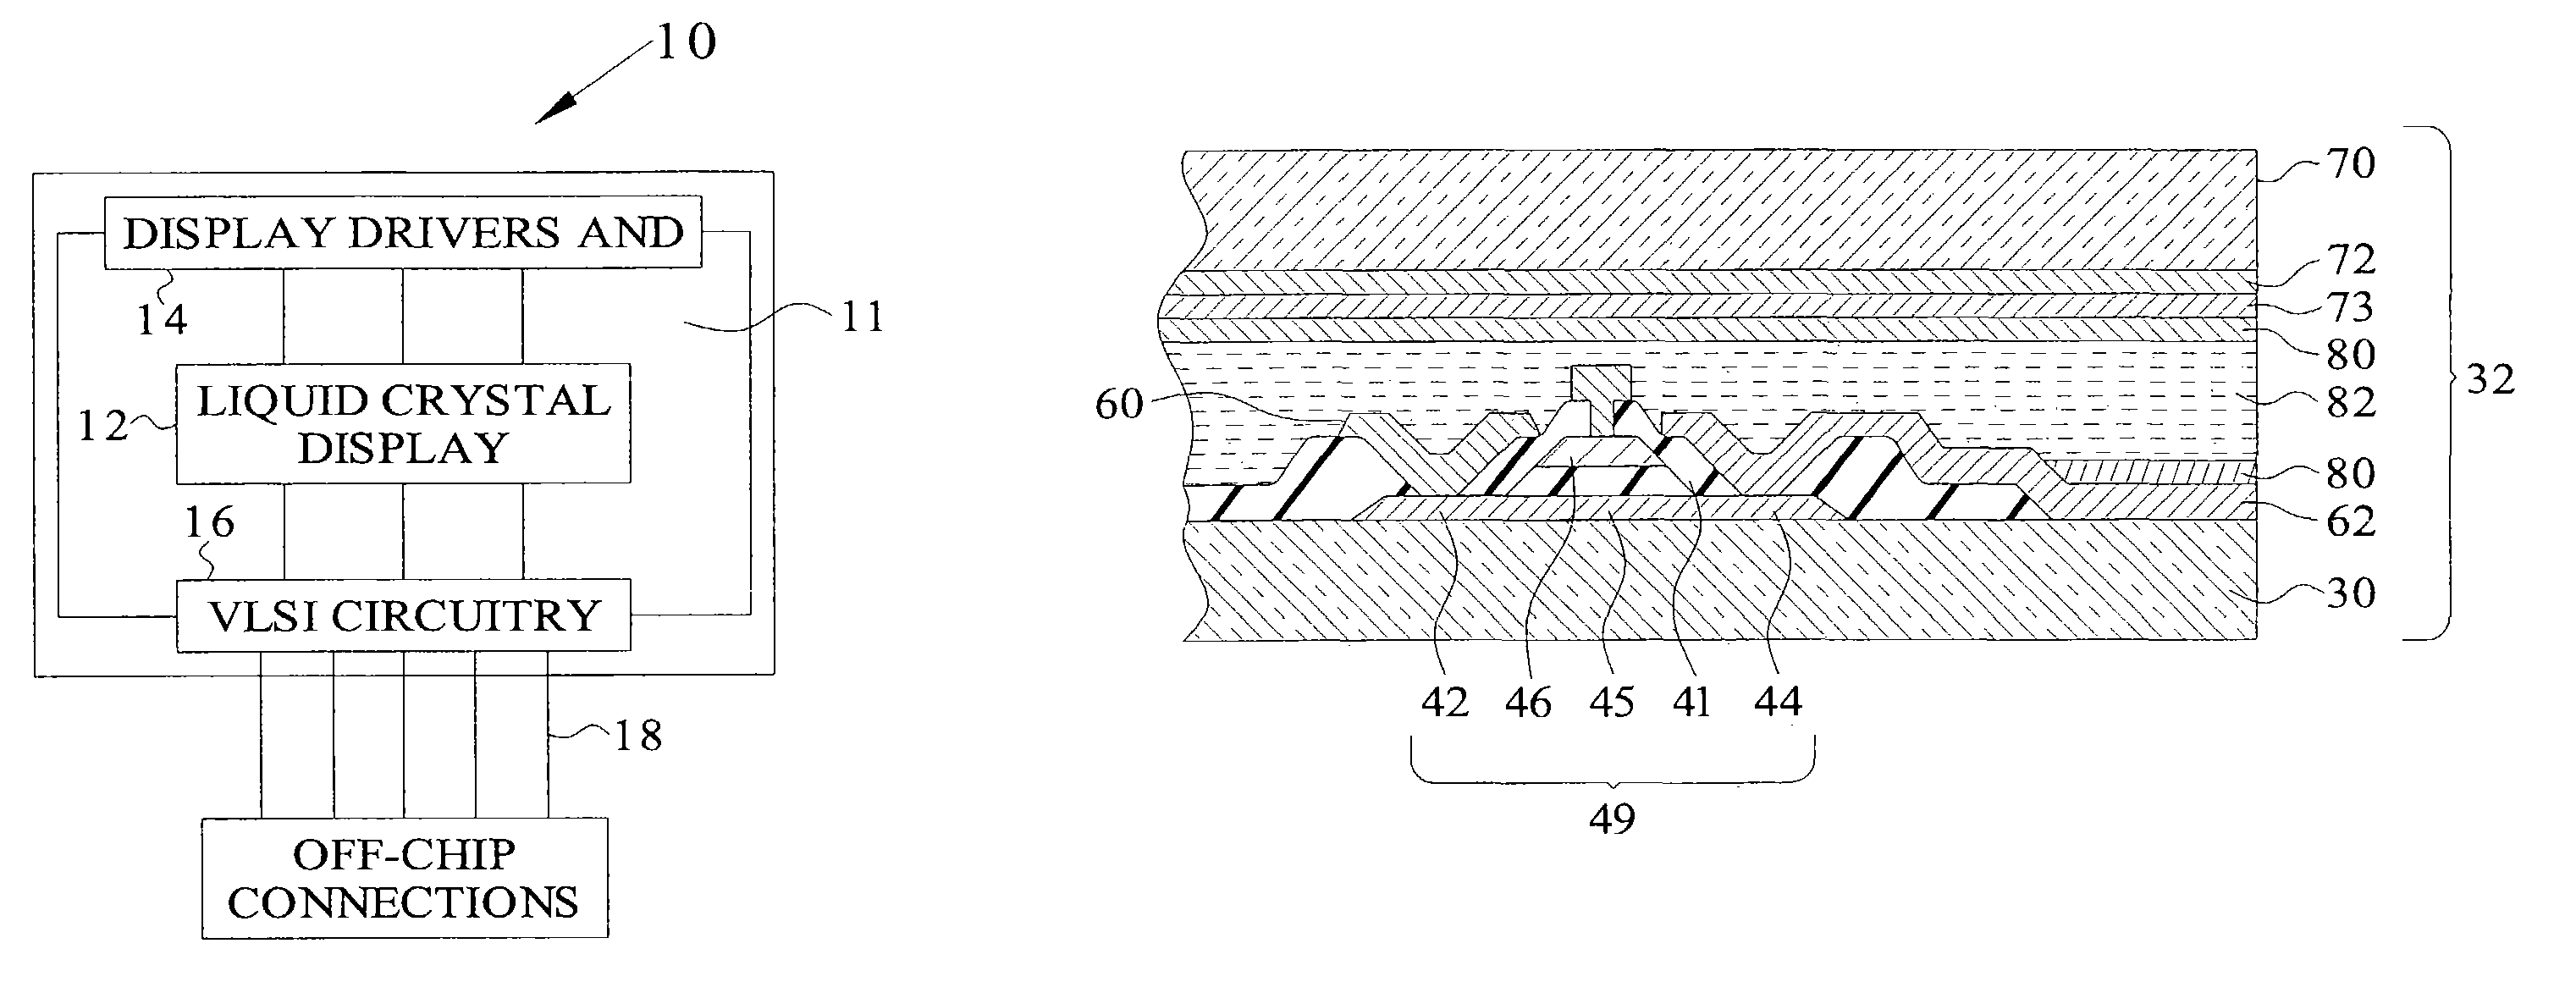 Silicon-on-sapphire display apparatus and method of fabricating same